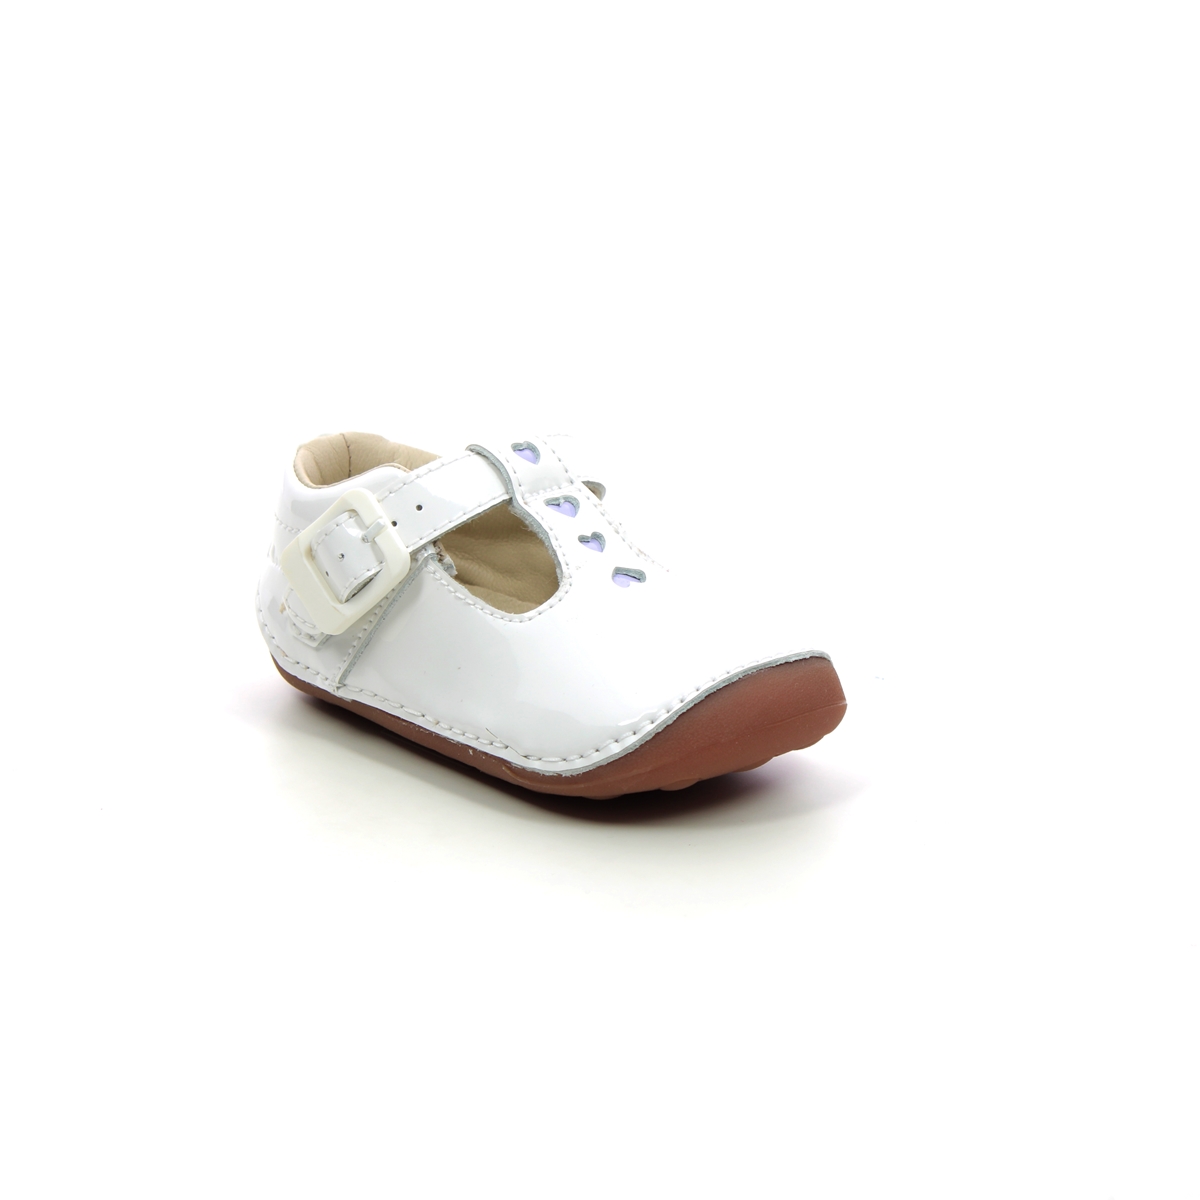 Clarks Tiny Beat T White patent Kids girls first and baby shoes 7158-77G in a Plain Leather in Size 4.5